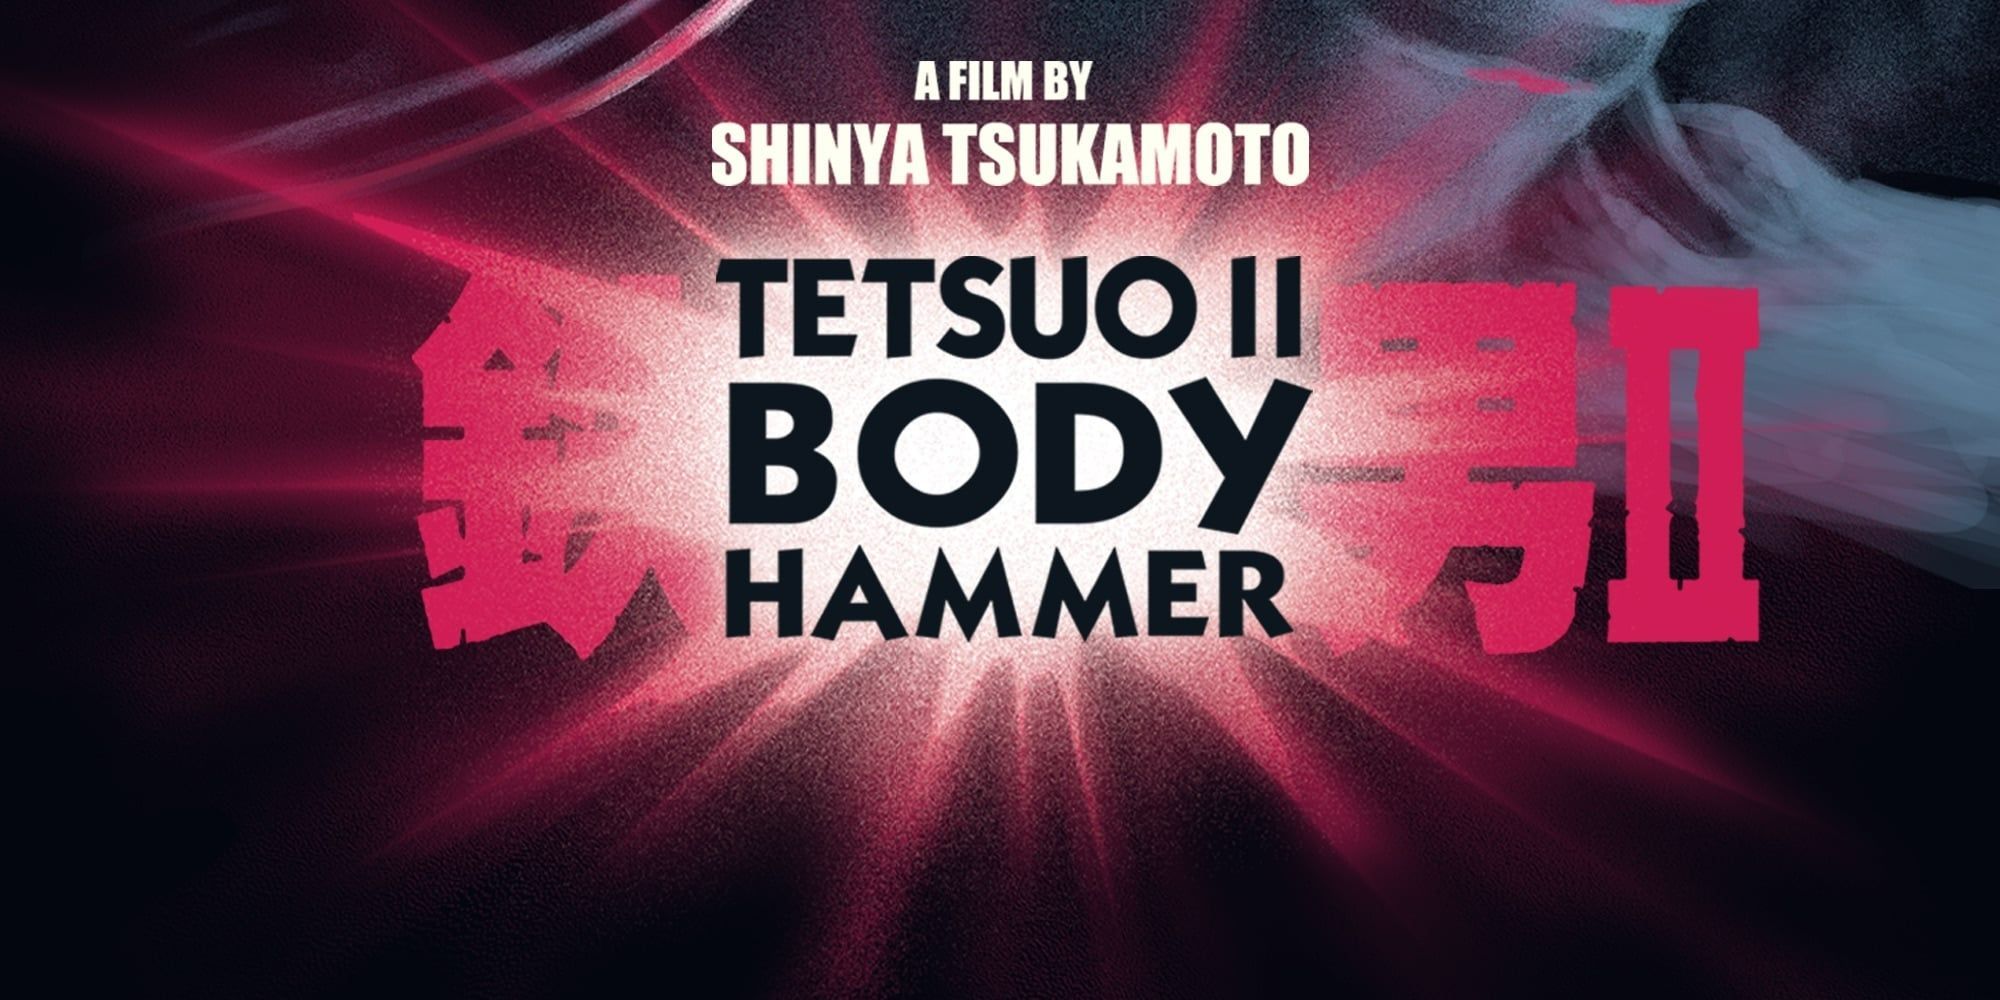 The title card for Tetsuo II: Body Hammer